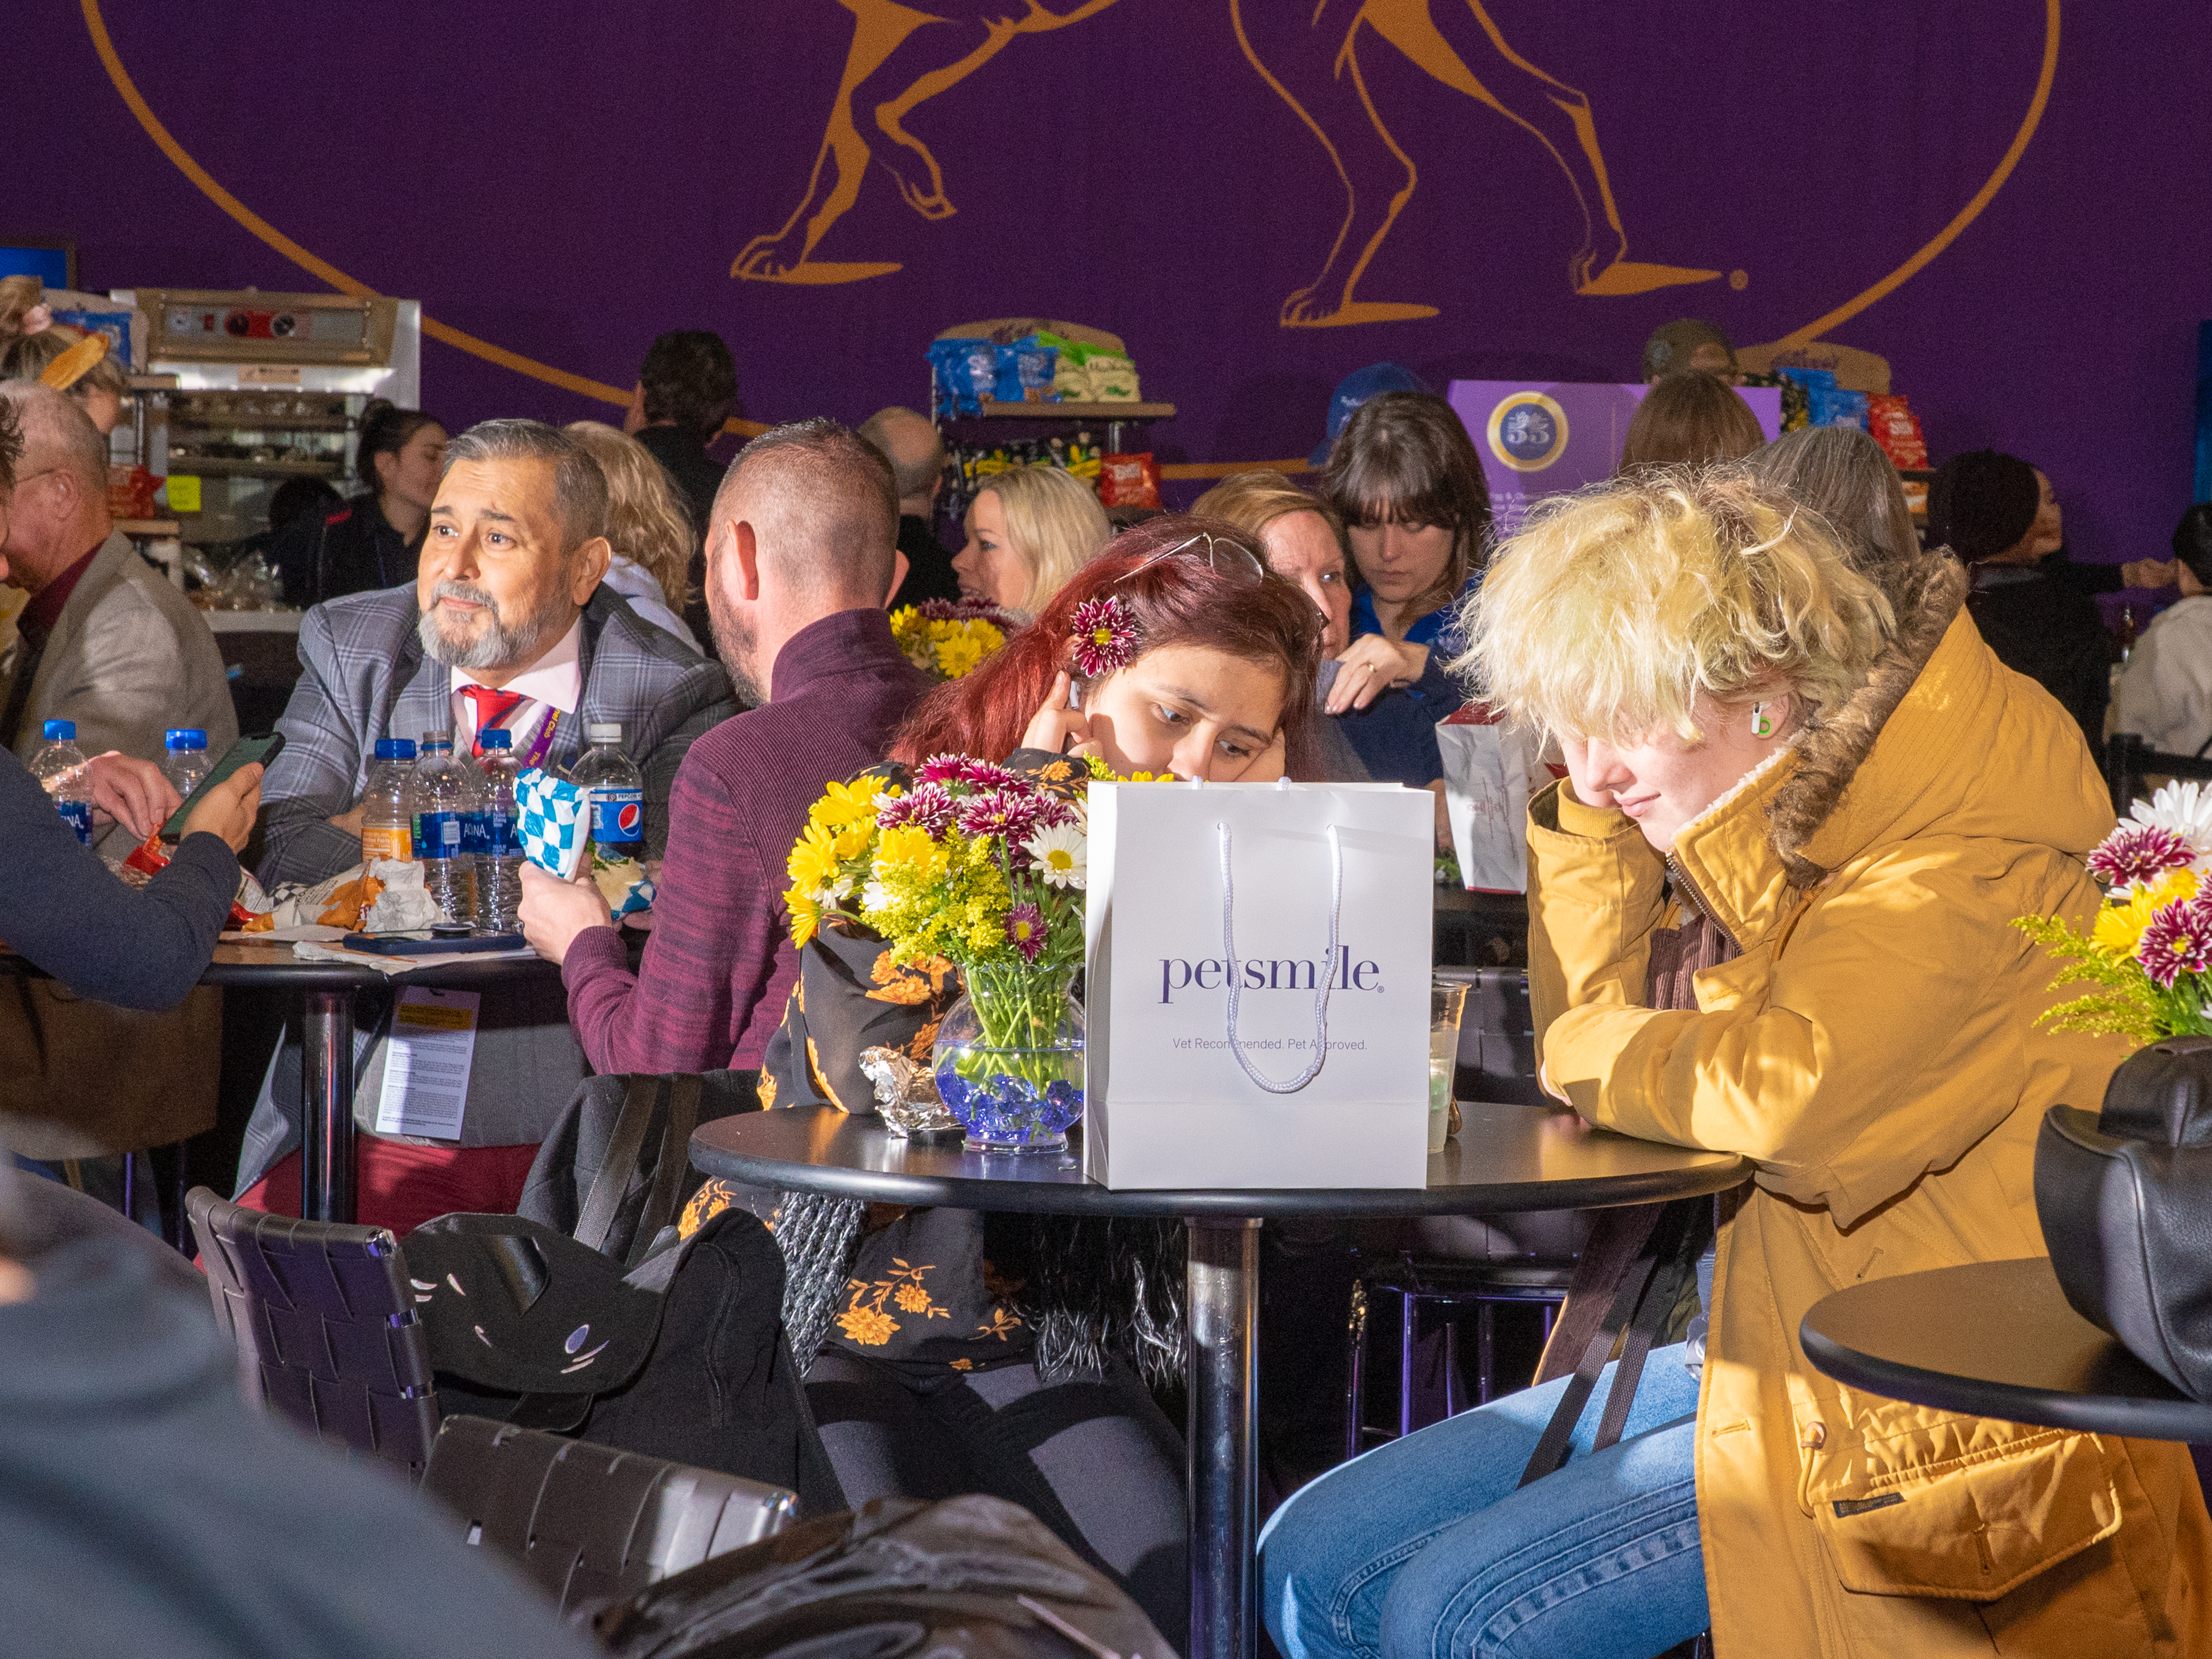 People hang out in the dining area at Pier 94 during the Westminster Dog Show (Evan Angelastro for TIME)